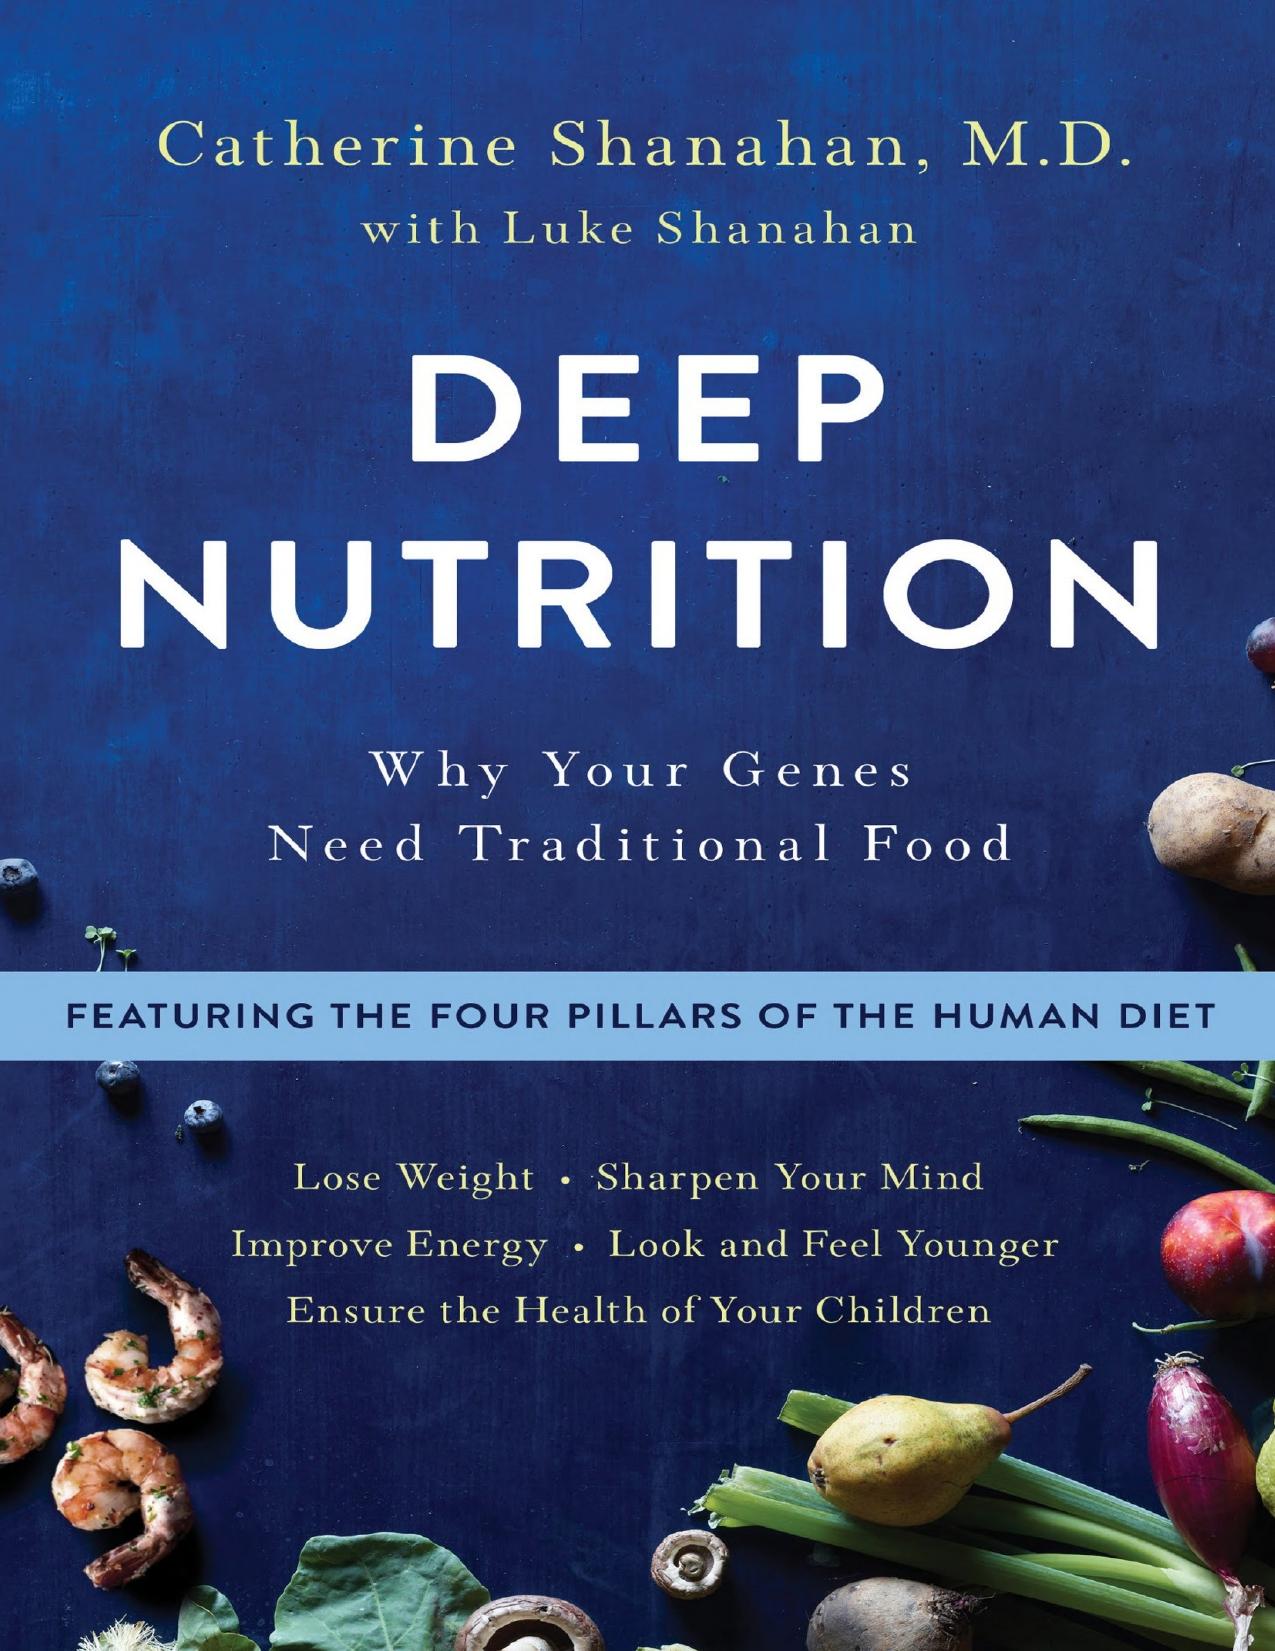 Deep Nutrition: Why Your Genes Need Traditional Food - PDFDrive.com